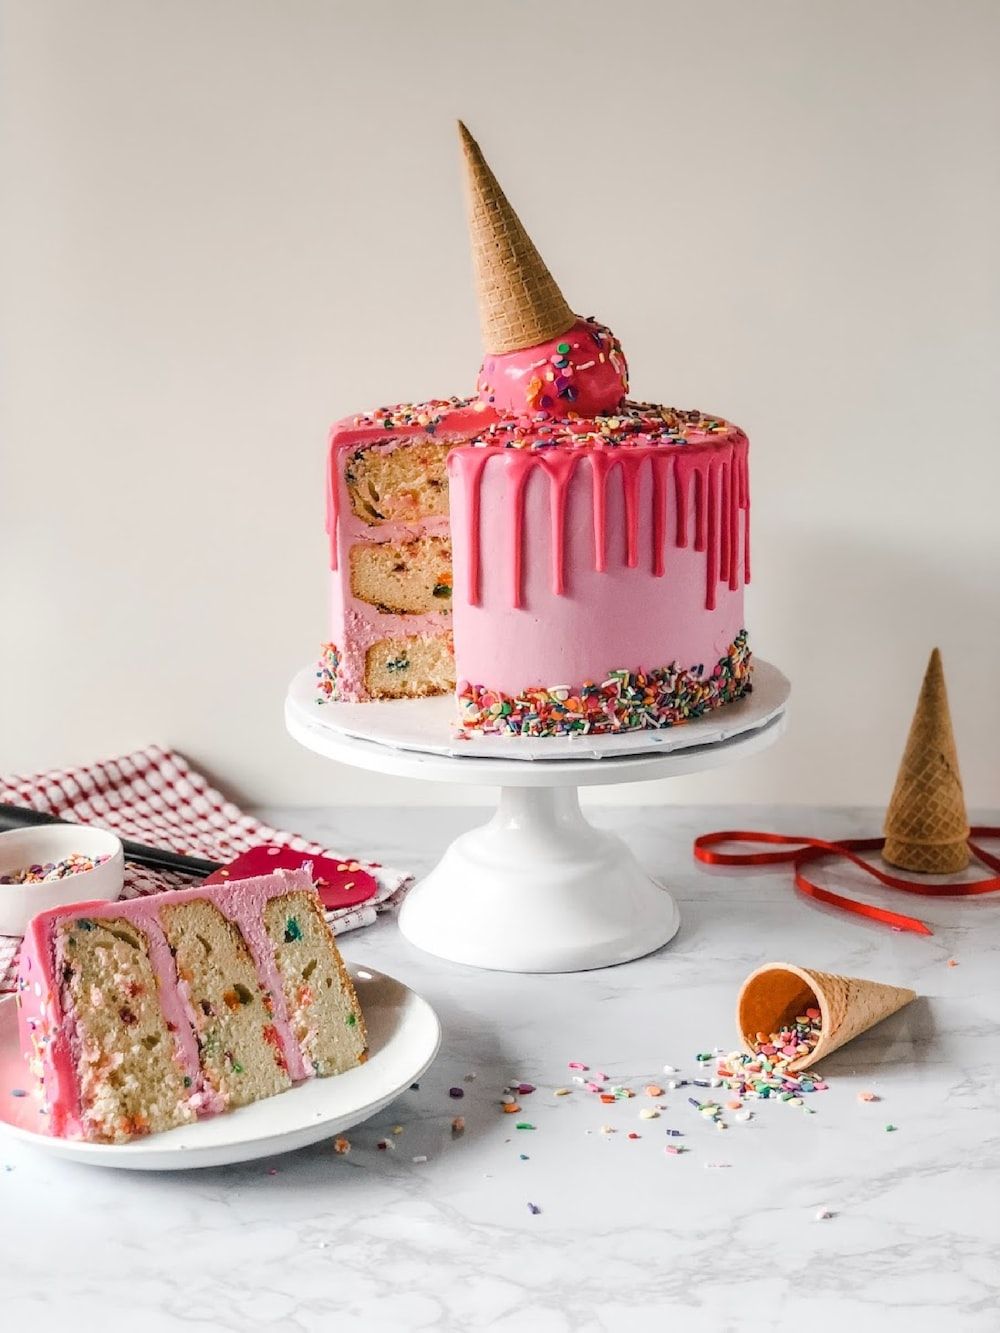 Cakes Picture [HD]. Download Free Image